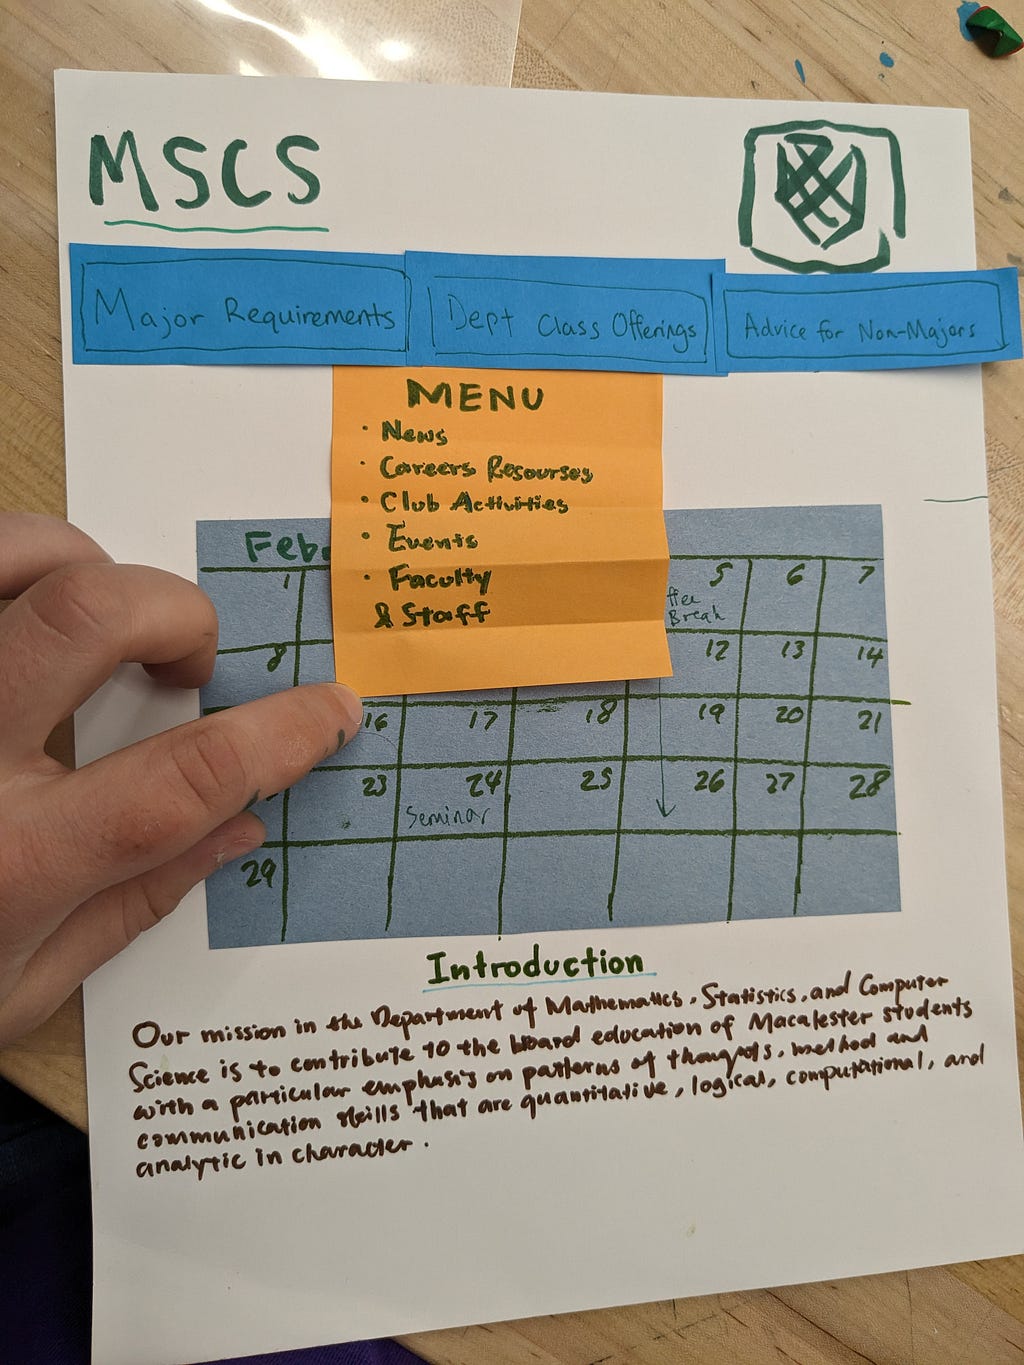 Paper prototype home page with events and menu dropdown.